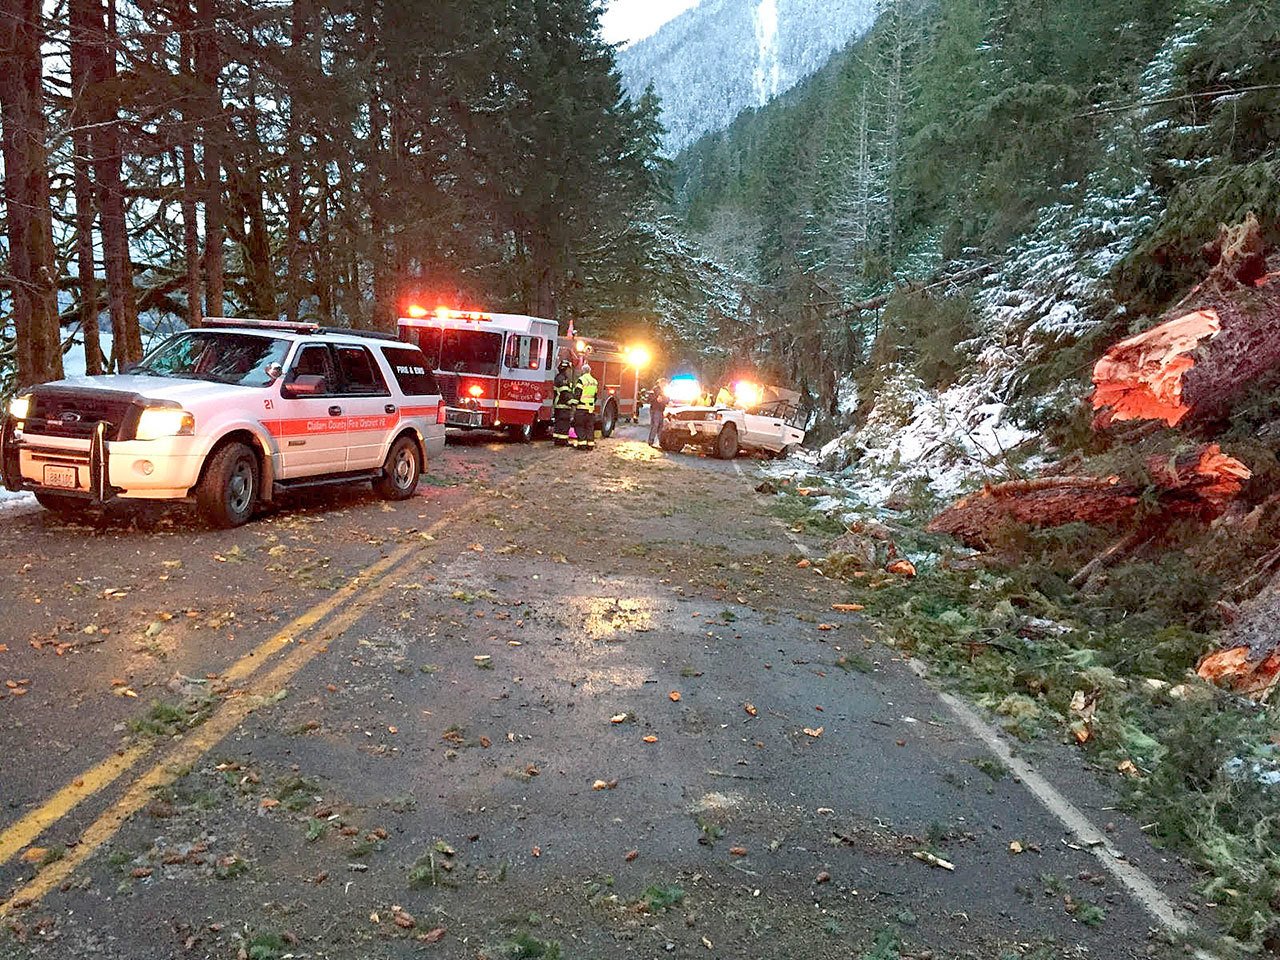 Emergency responders work around an empty SUV that held five people when it was struck by a tree at Lake Crescent on Sunday. (Clallam County Fire District No. 2)